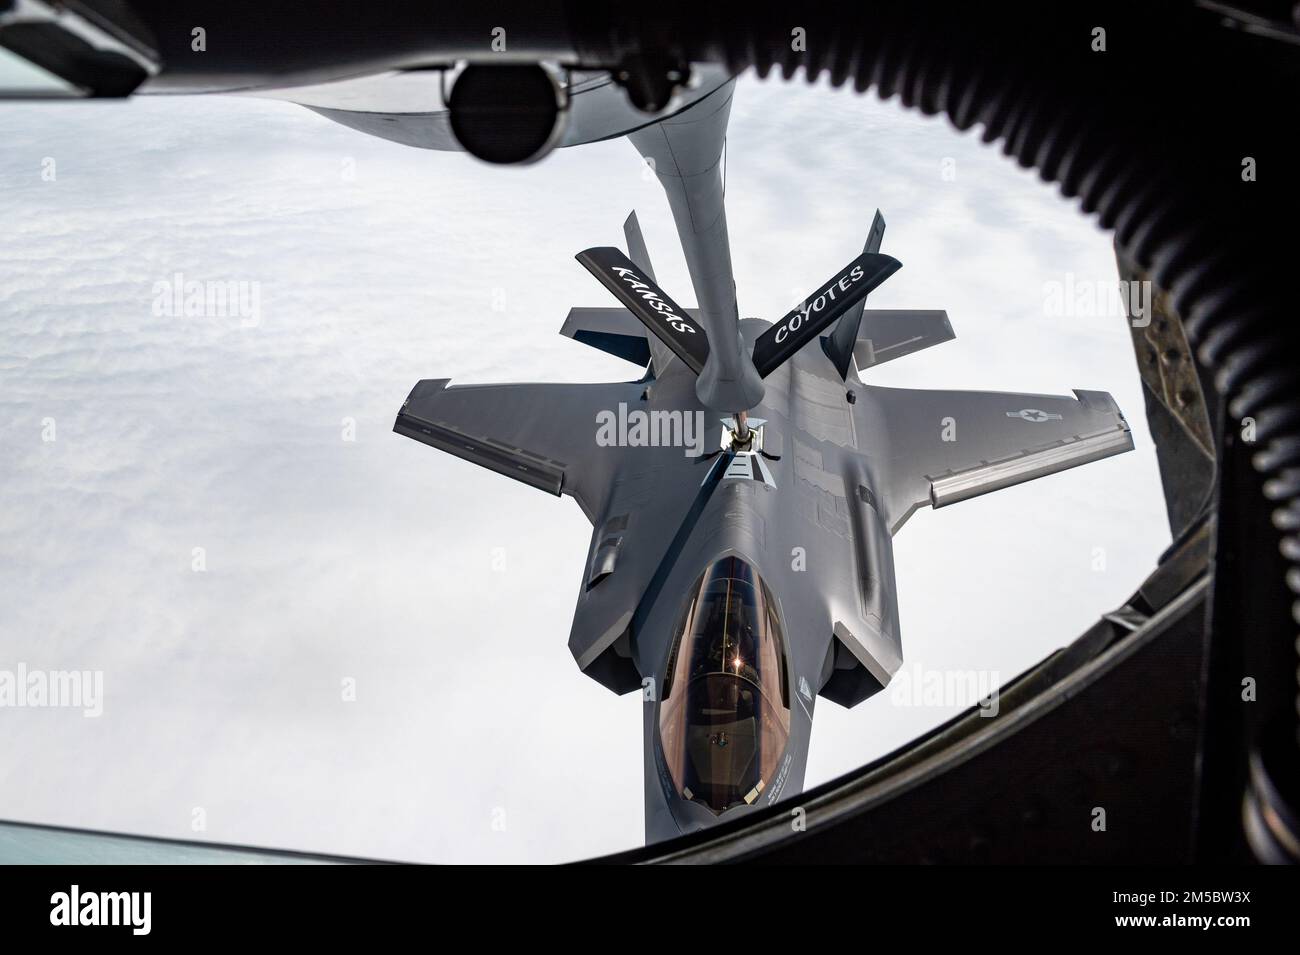 An F-35A Lightning II from the 354th Fighter Wing, Eielson Air Force Base, Alaska, receives fuel from a KC-135 Stratotanker assigned to the 117th Air Refueling Squadron, Forbes Field Air National Guard Base, Topeka, Kansas, over the Indo-Pacific theater, Feb. 24, 2022.  The F-35As are currently deployed to Kadena Air Base, Japan, conducting integrated operations with joint partners and allies to maintain a free and open Indo-Pacific region. Stock Photo